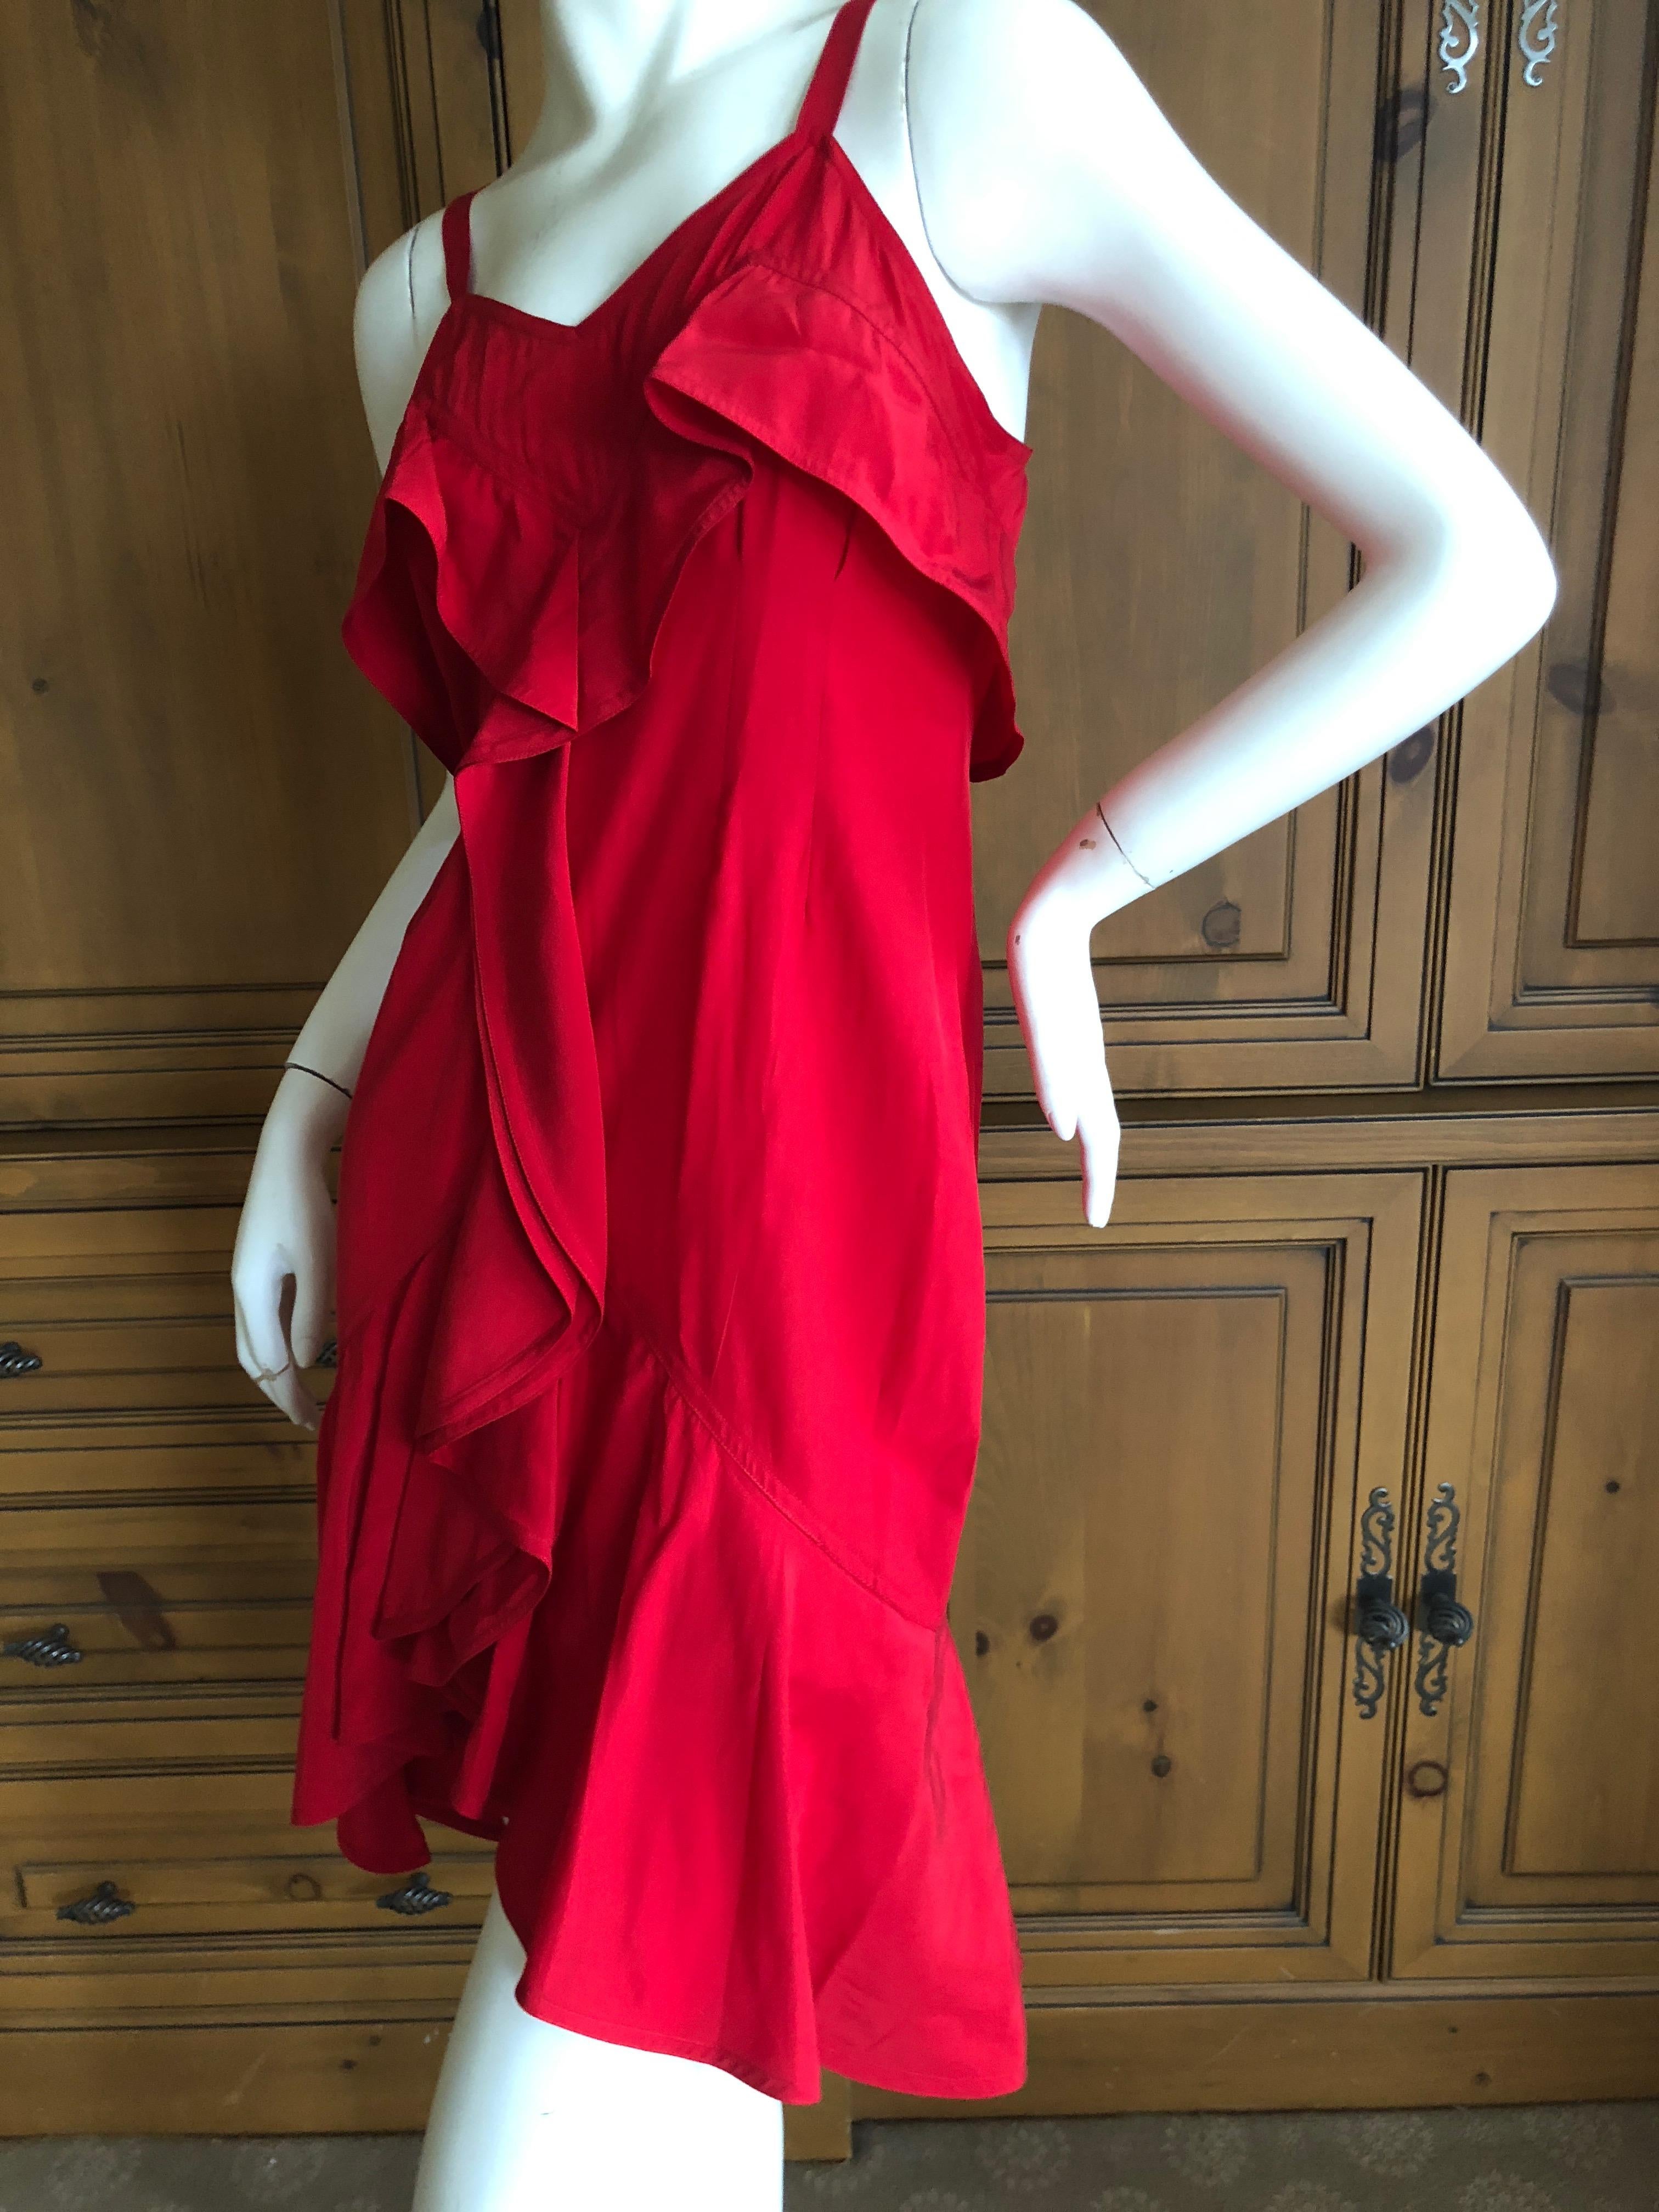 Yves Saint Laurent Tom Ford Fall 2003 Look 1 Red Ruffle Silk Dress
Size Small
Bust 36